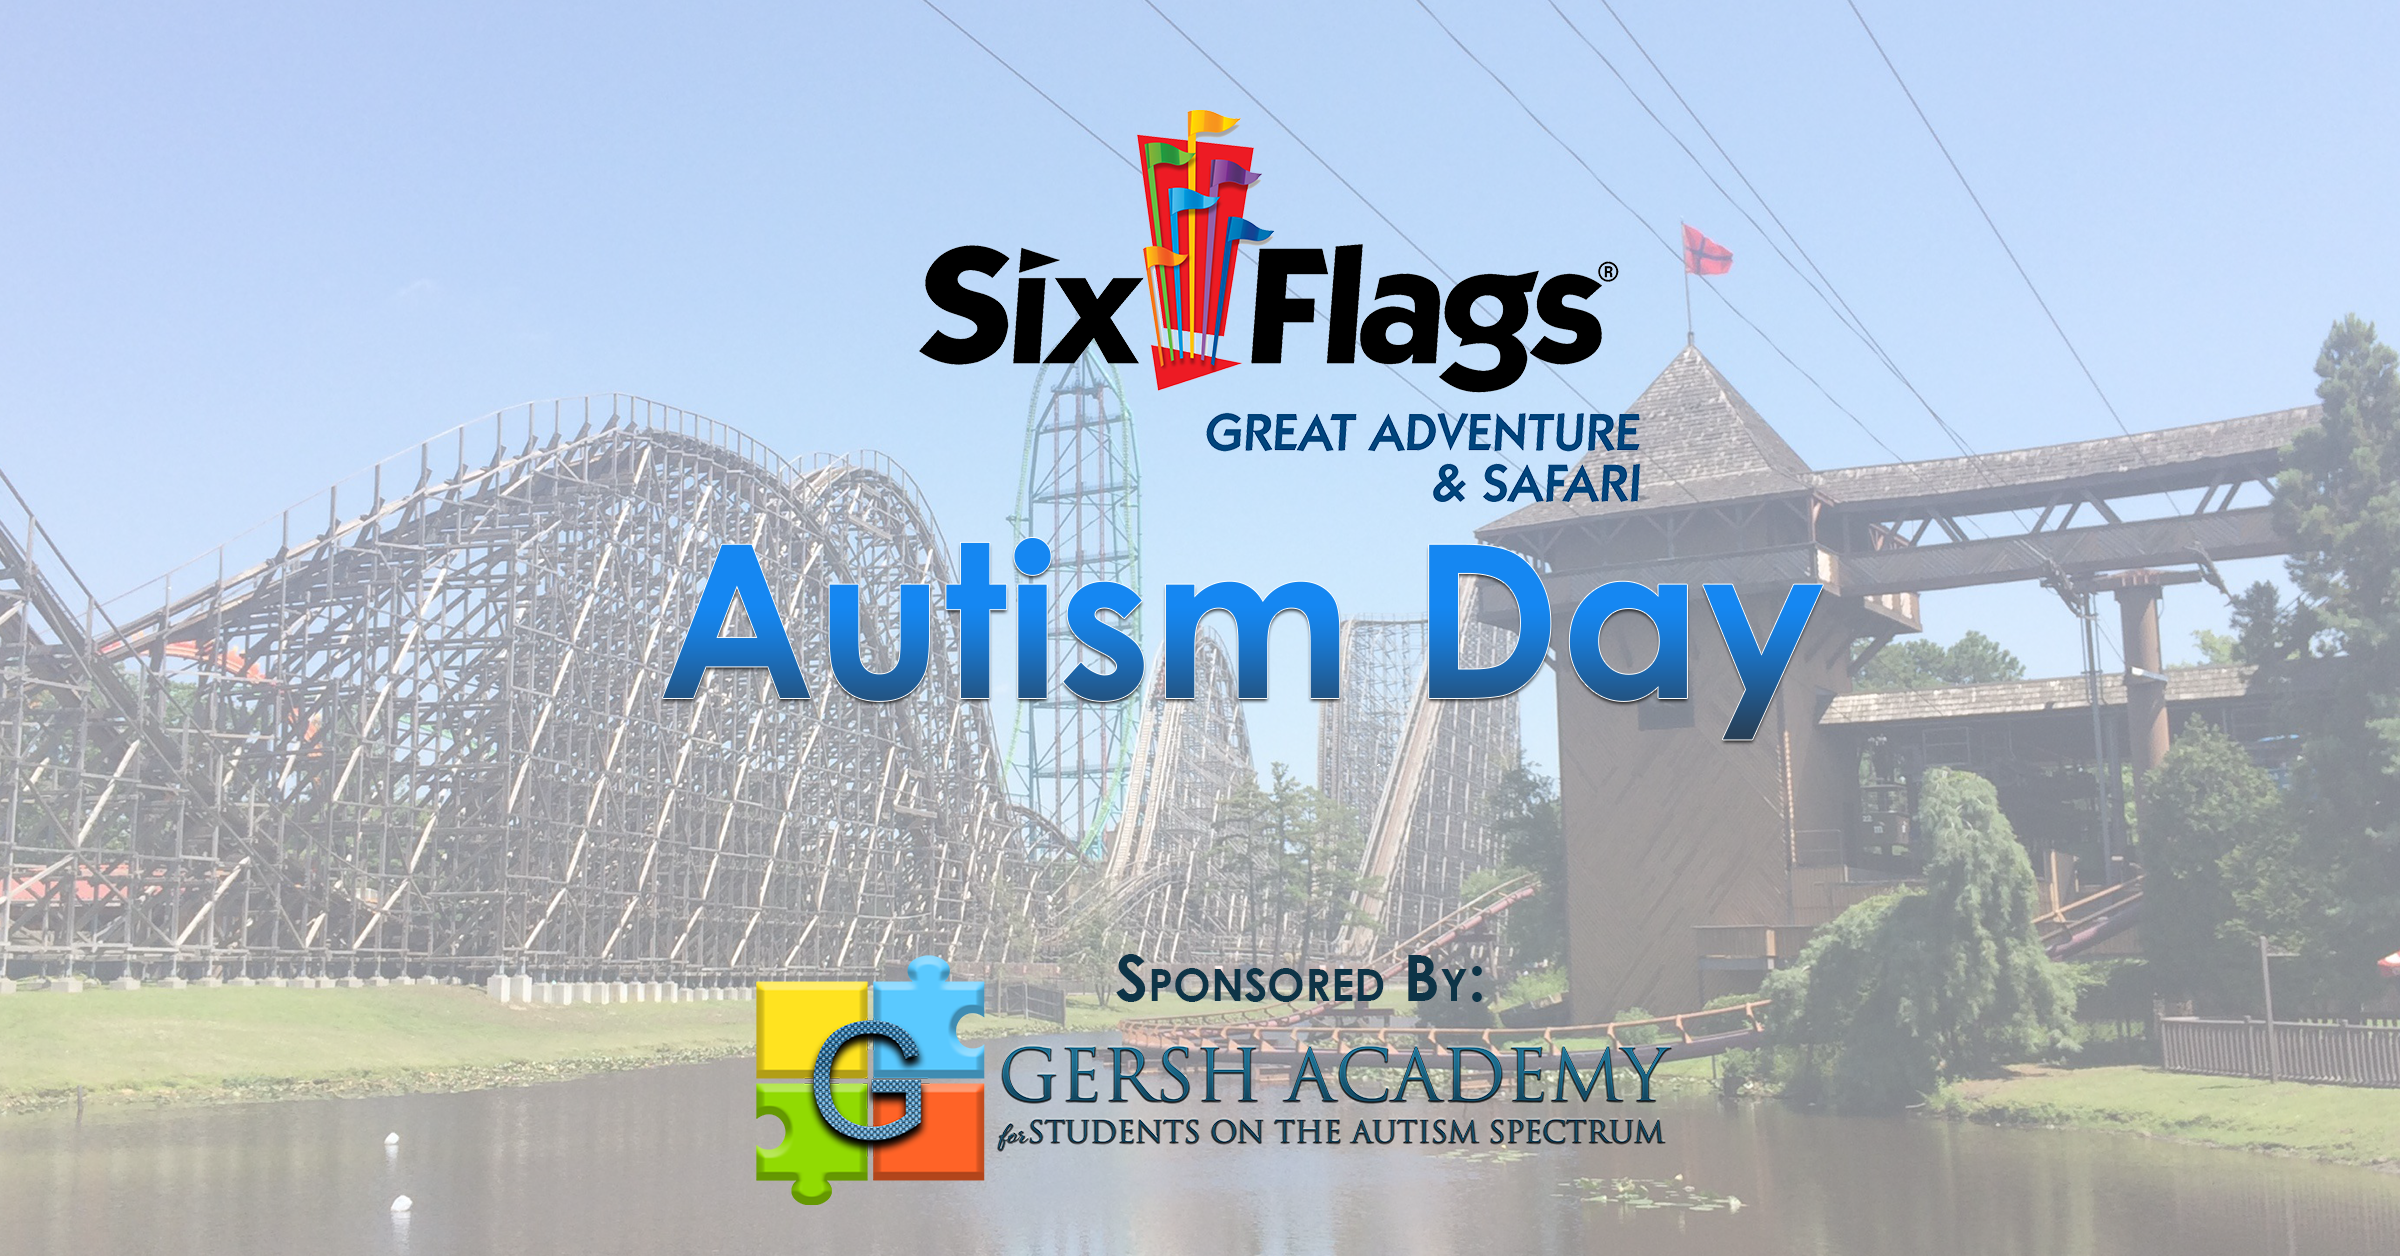 a Sponsor Autism Day at Six Flags Great Adventure